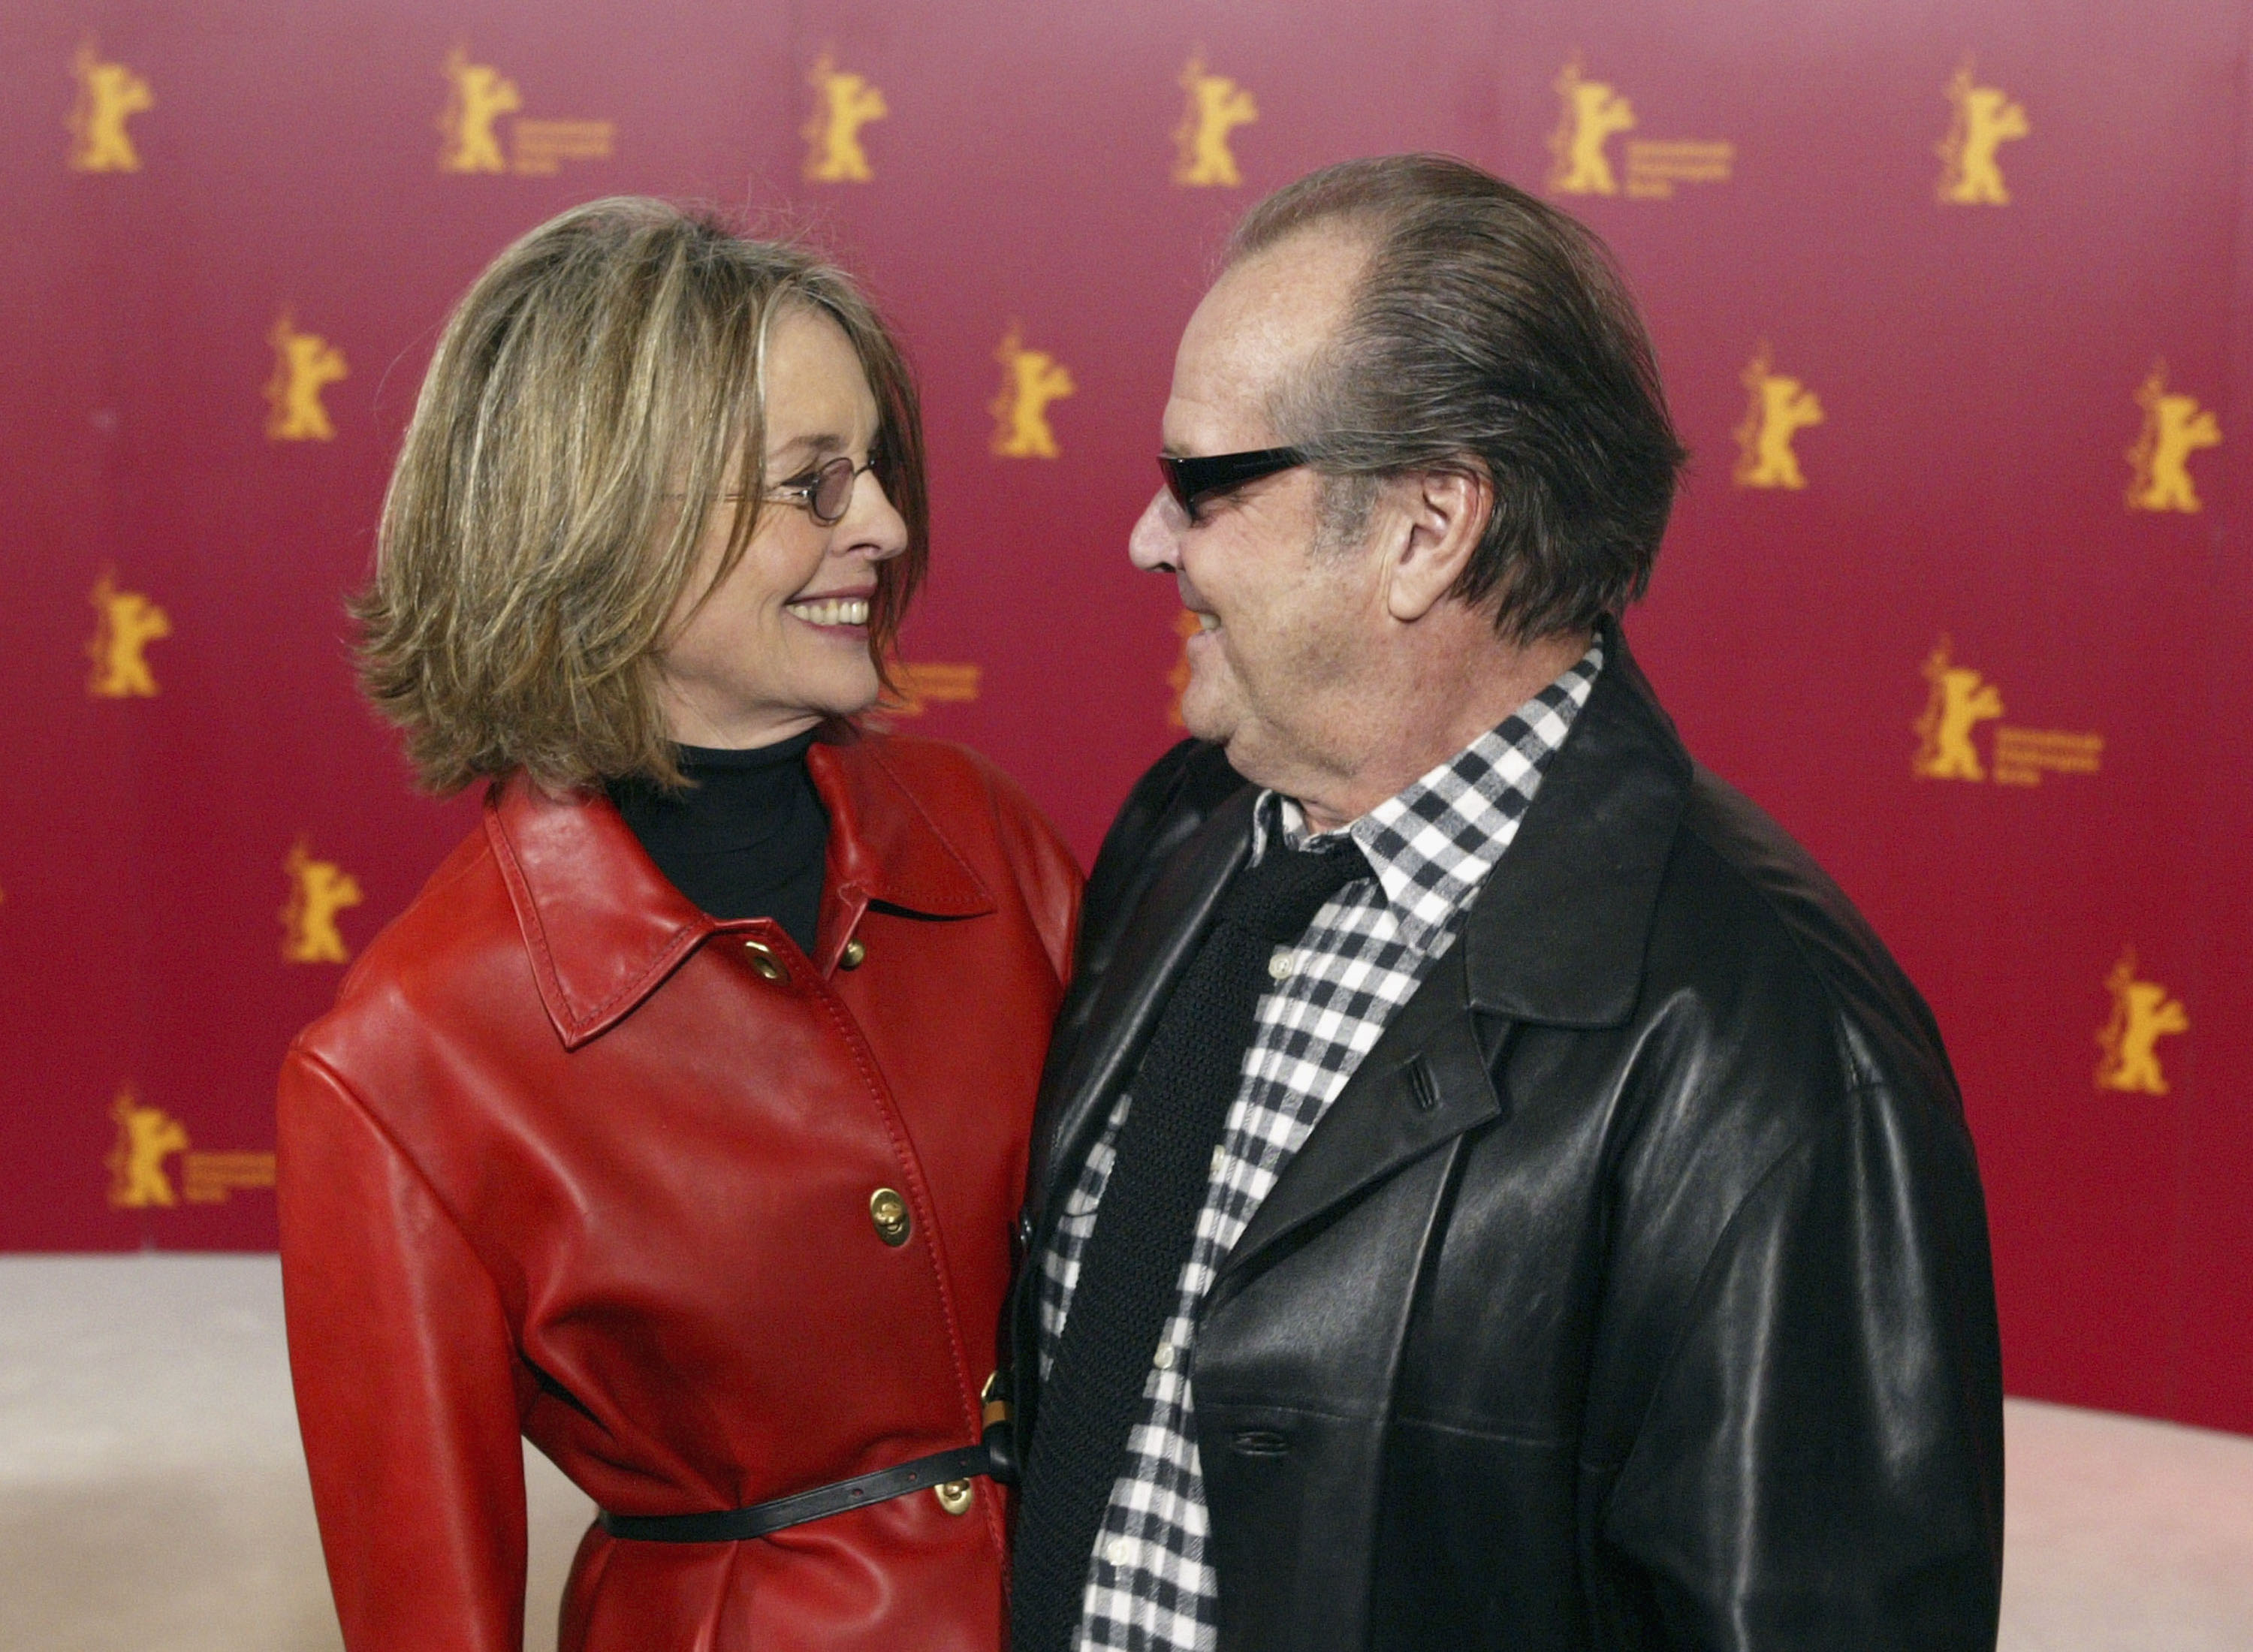 Jack Nicholson and Diane Keaton at the photocall for "Something's Gotta Give" at the 54th annual Berlinale International Film Festival, on February 6, 2004, in Berlin, Germany | Source: Getty Images